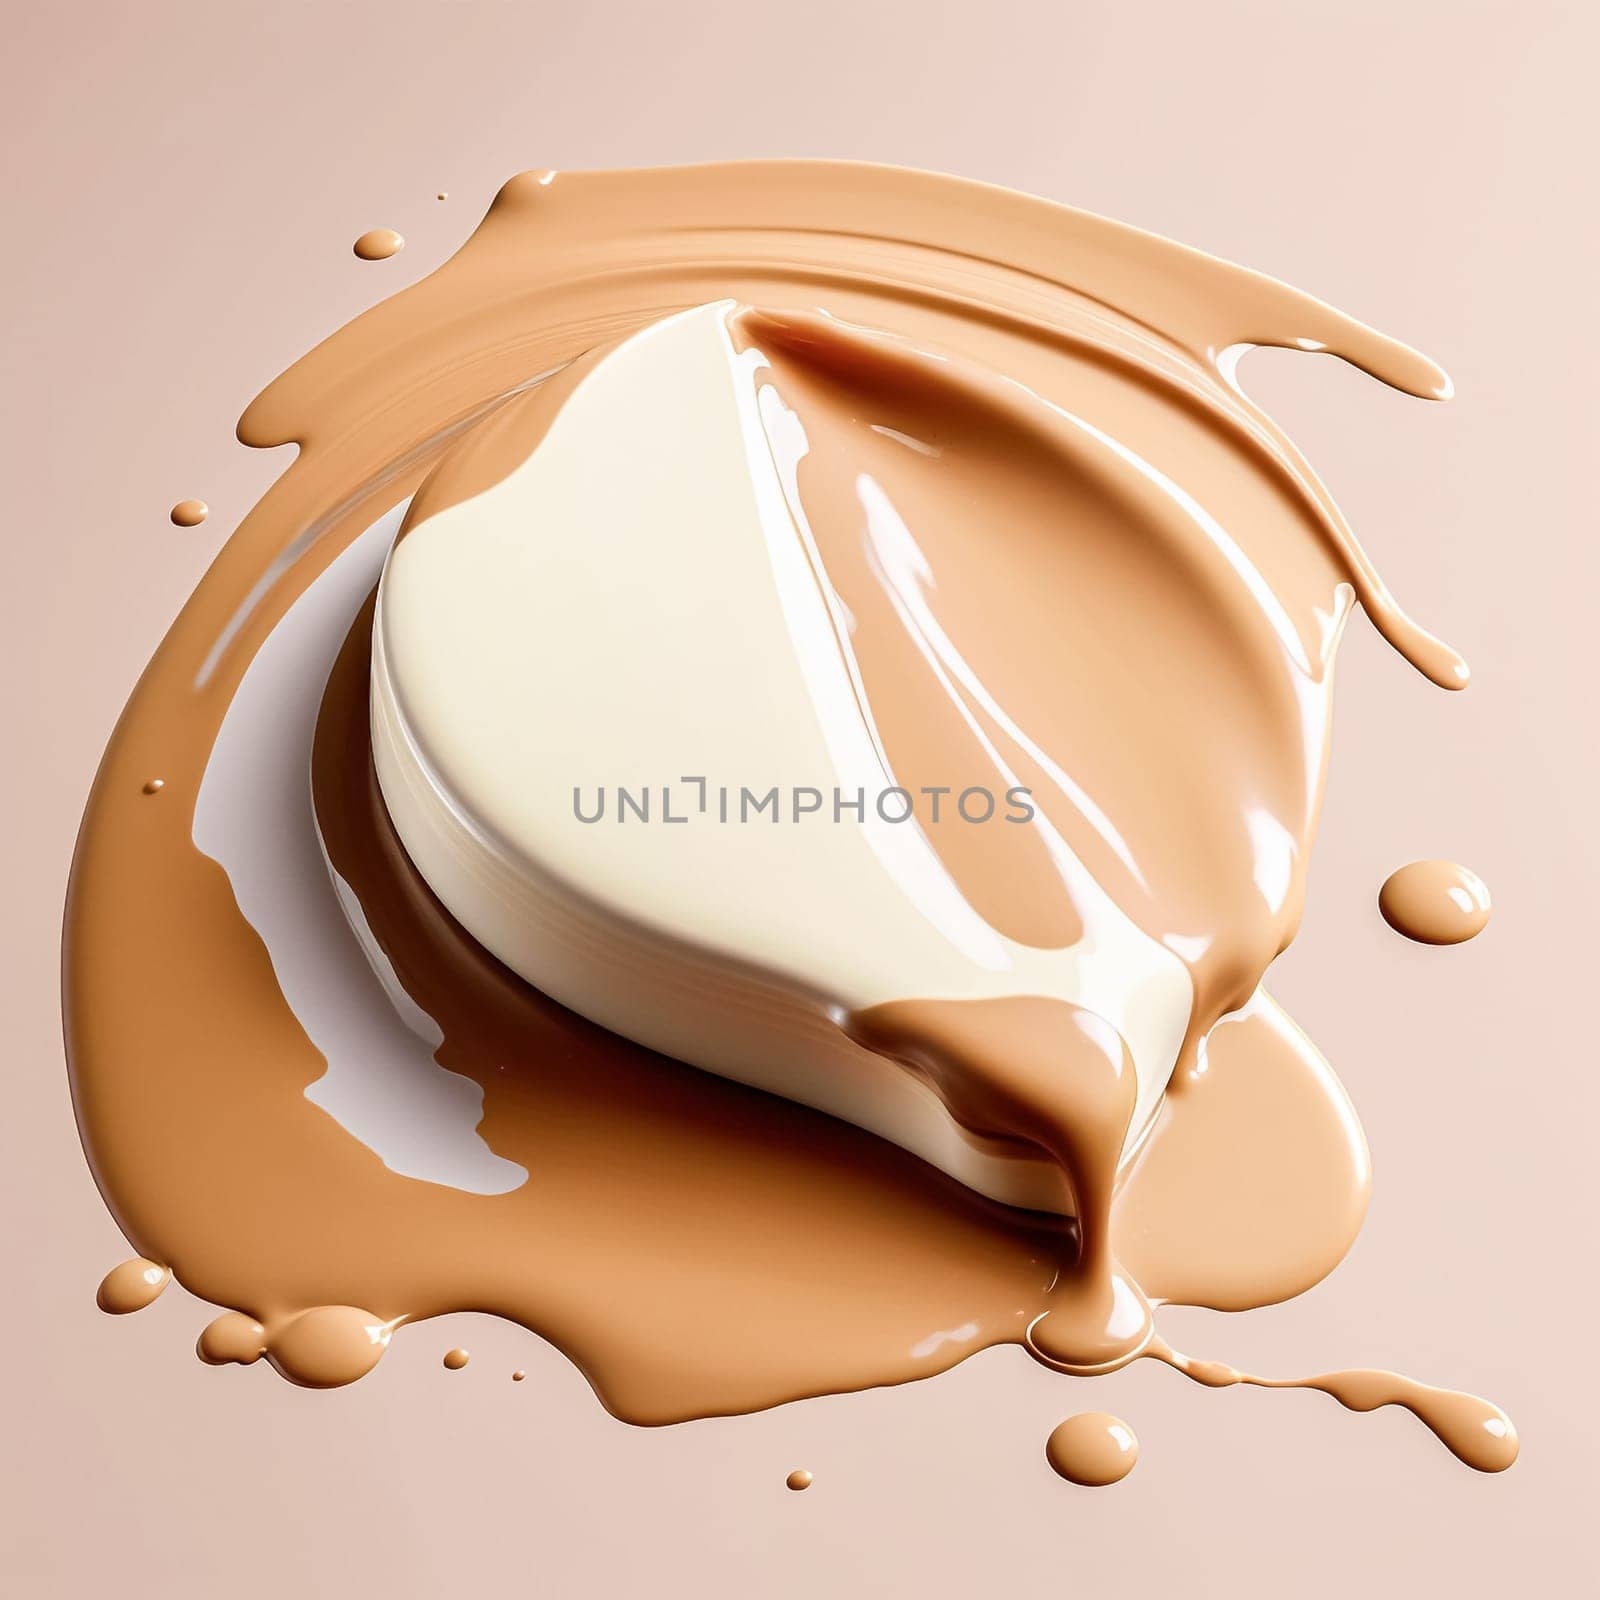 Liquid foundation splashes on light clean background close up of isolated make up smudges or beige skin care fluid. Standard illustration for beauty and cosmetics.